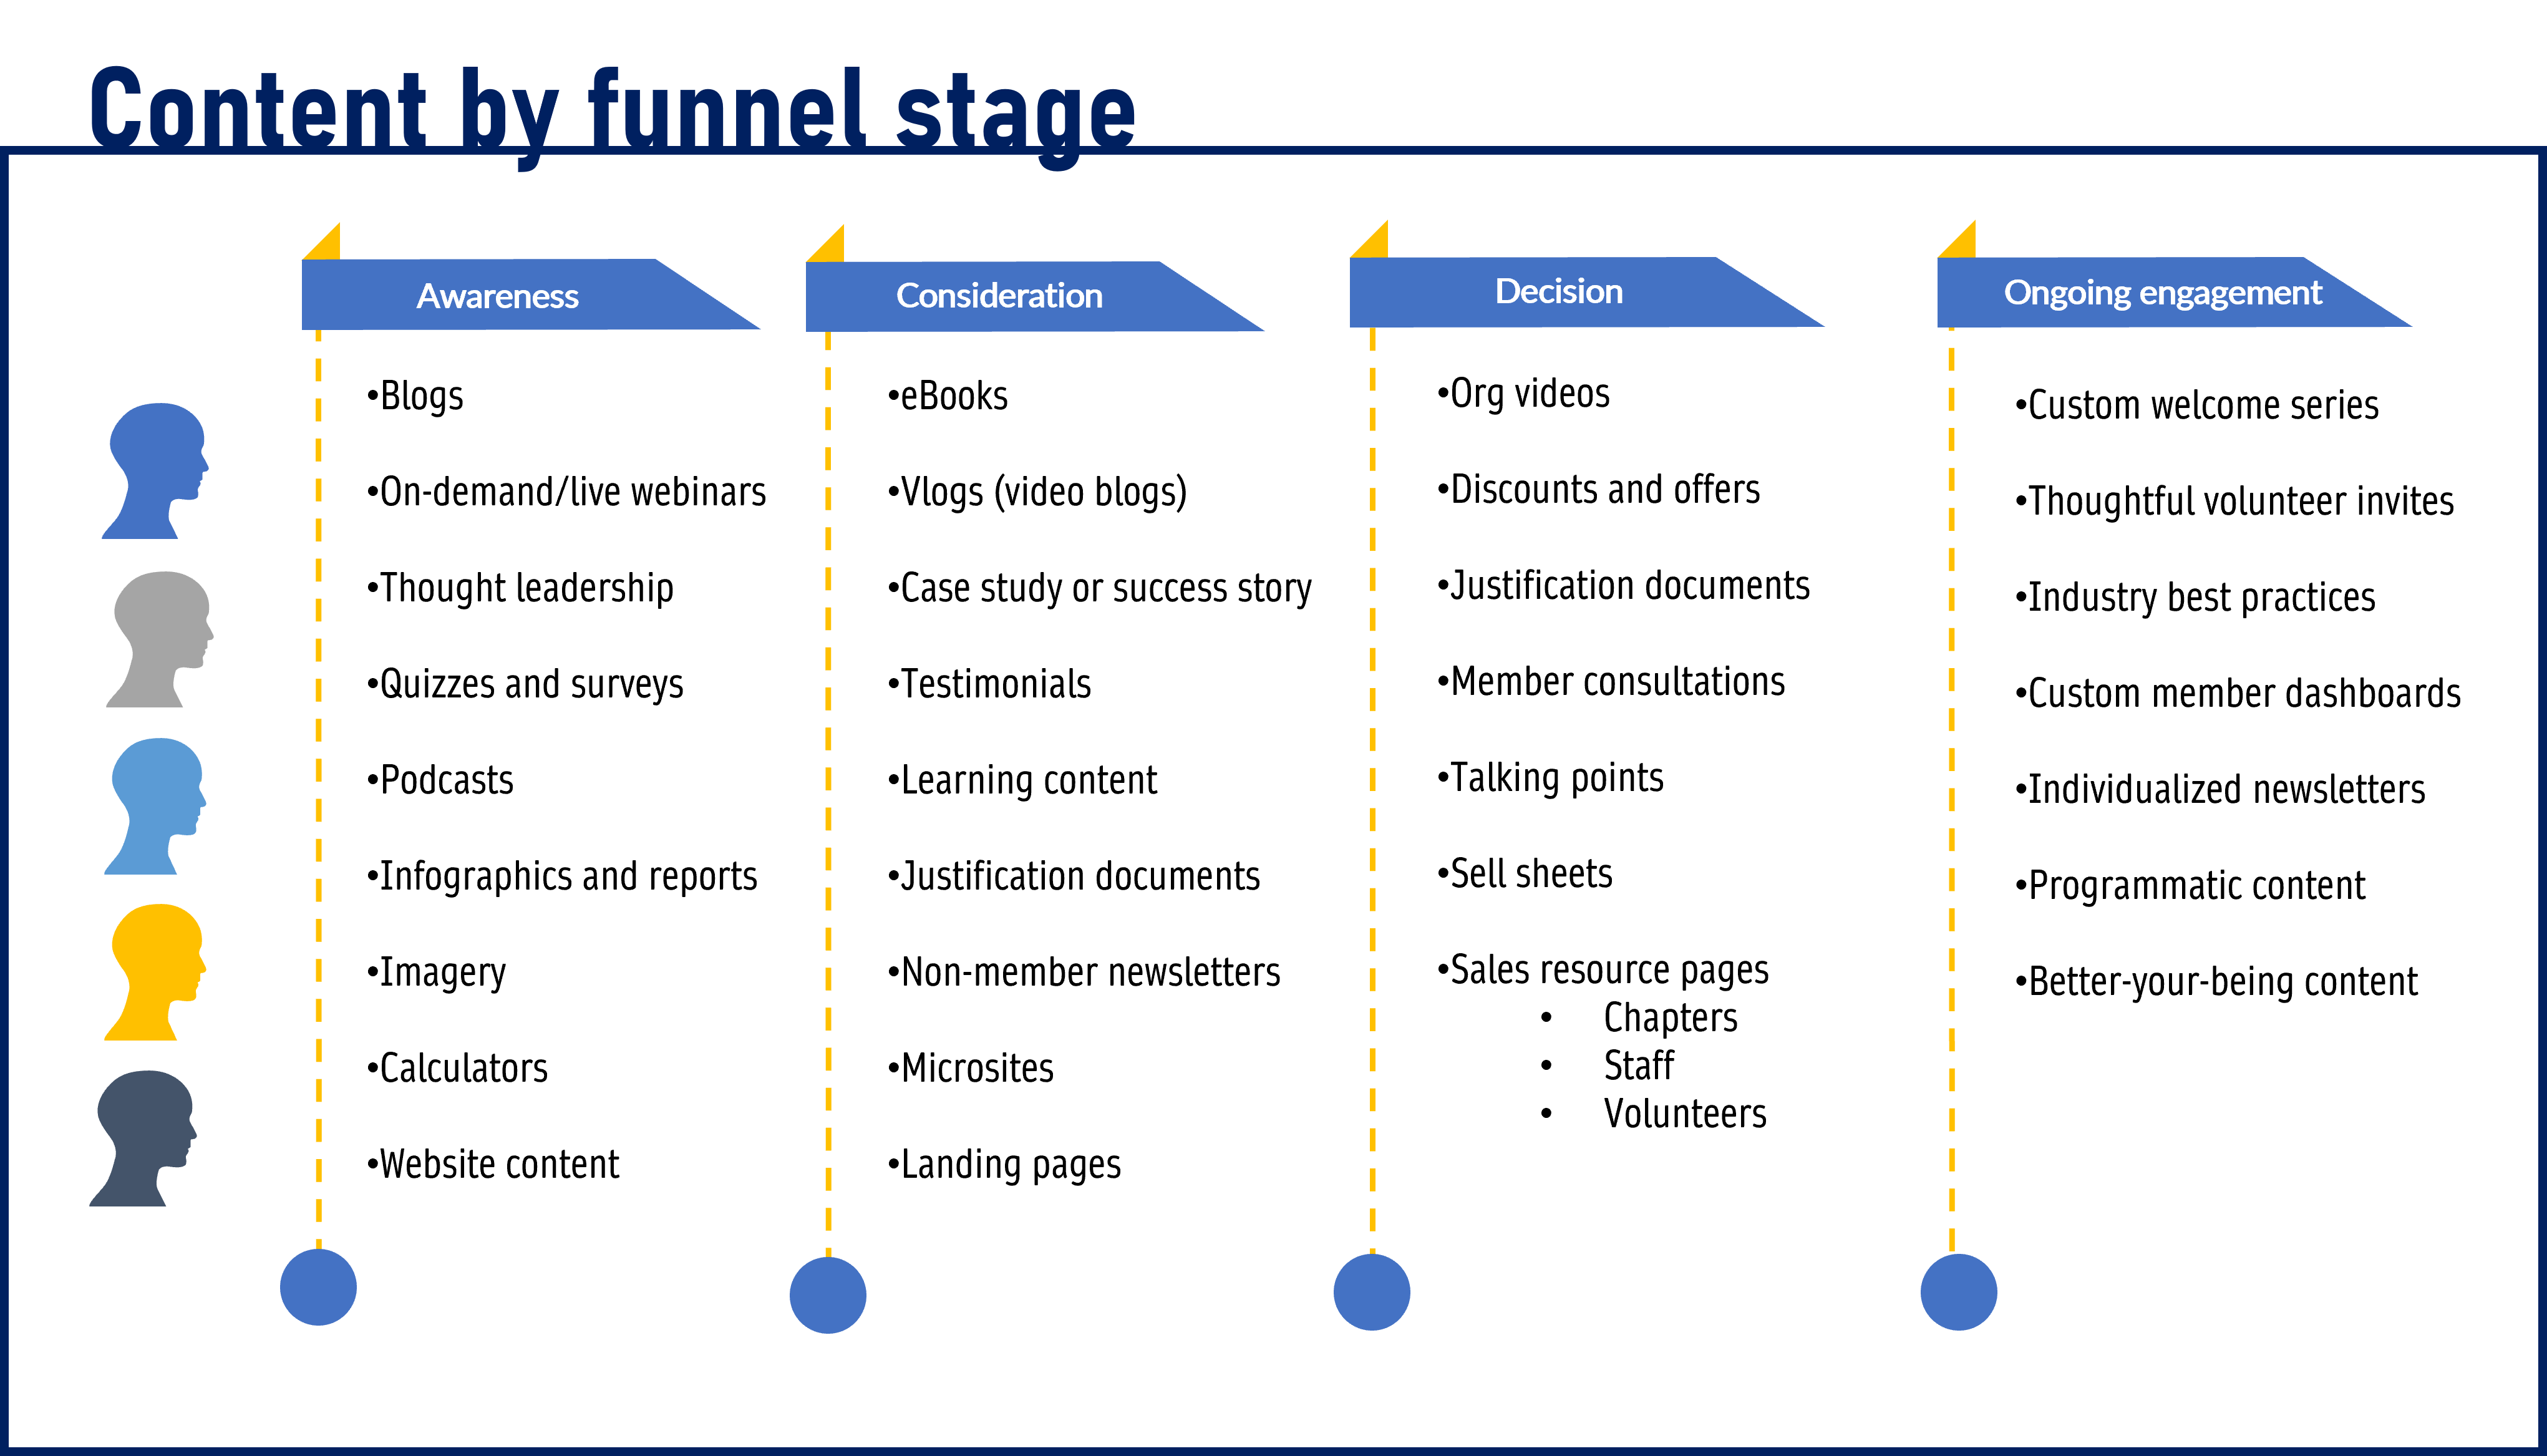 Content by Funnel Stage